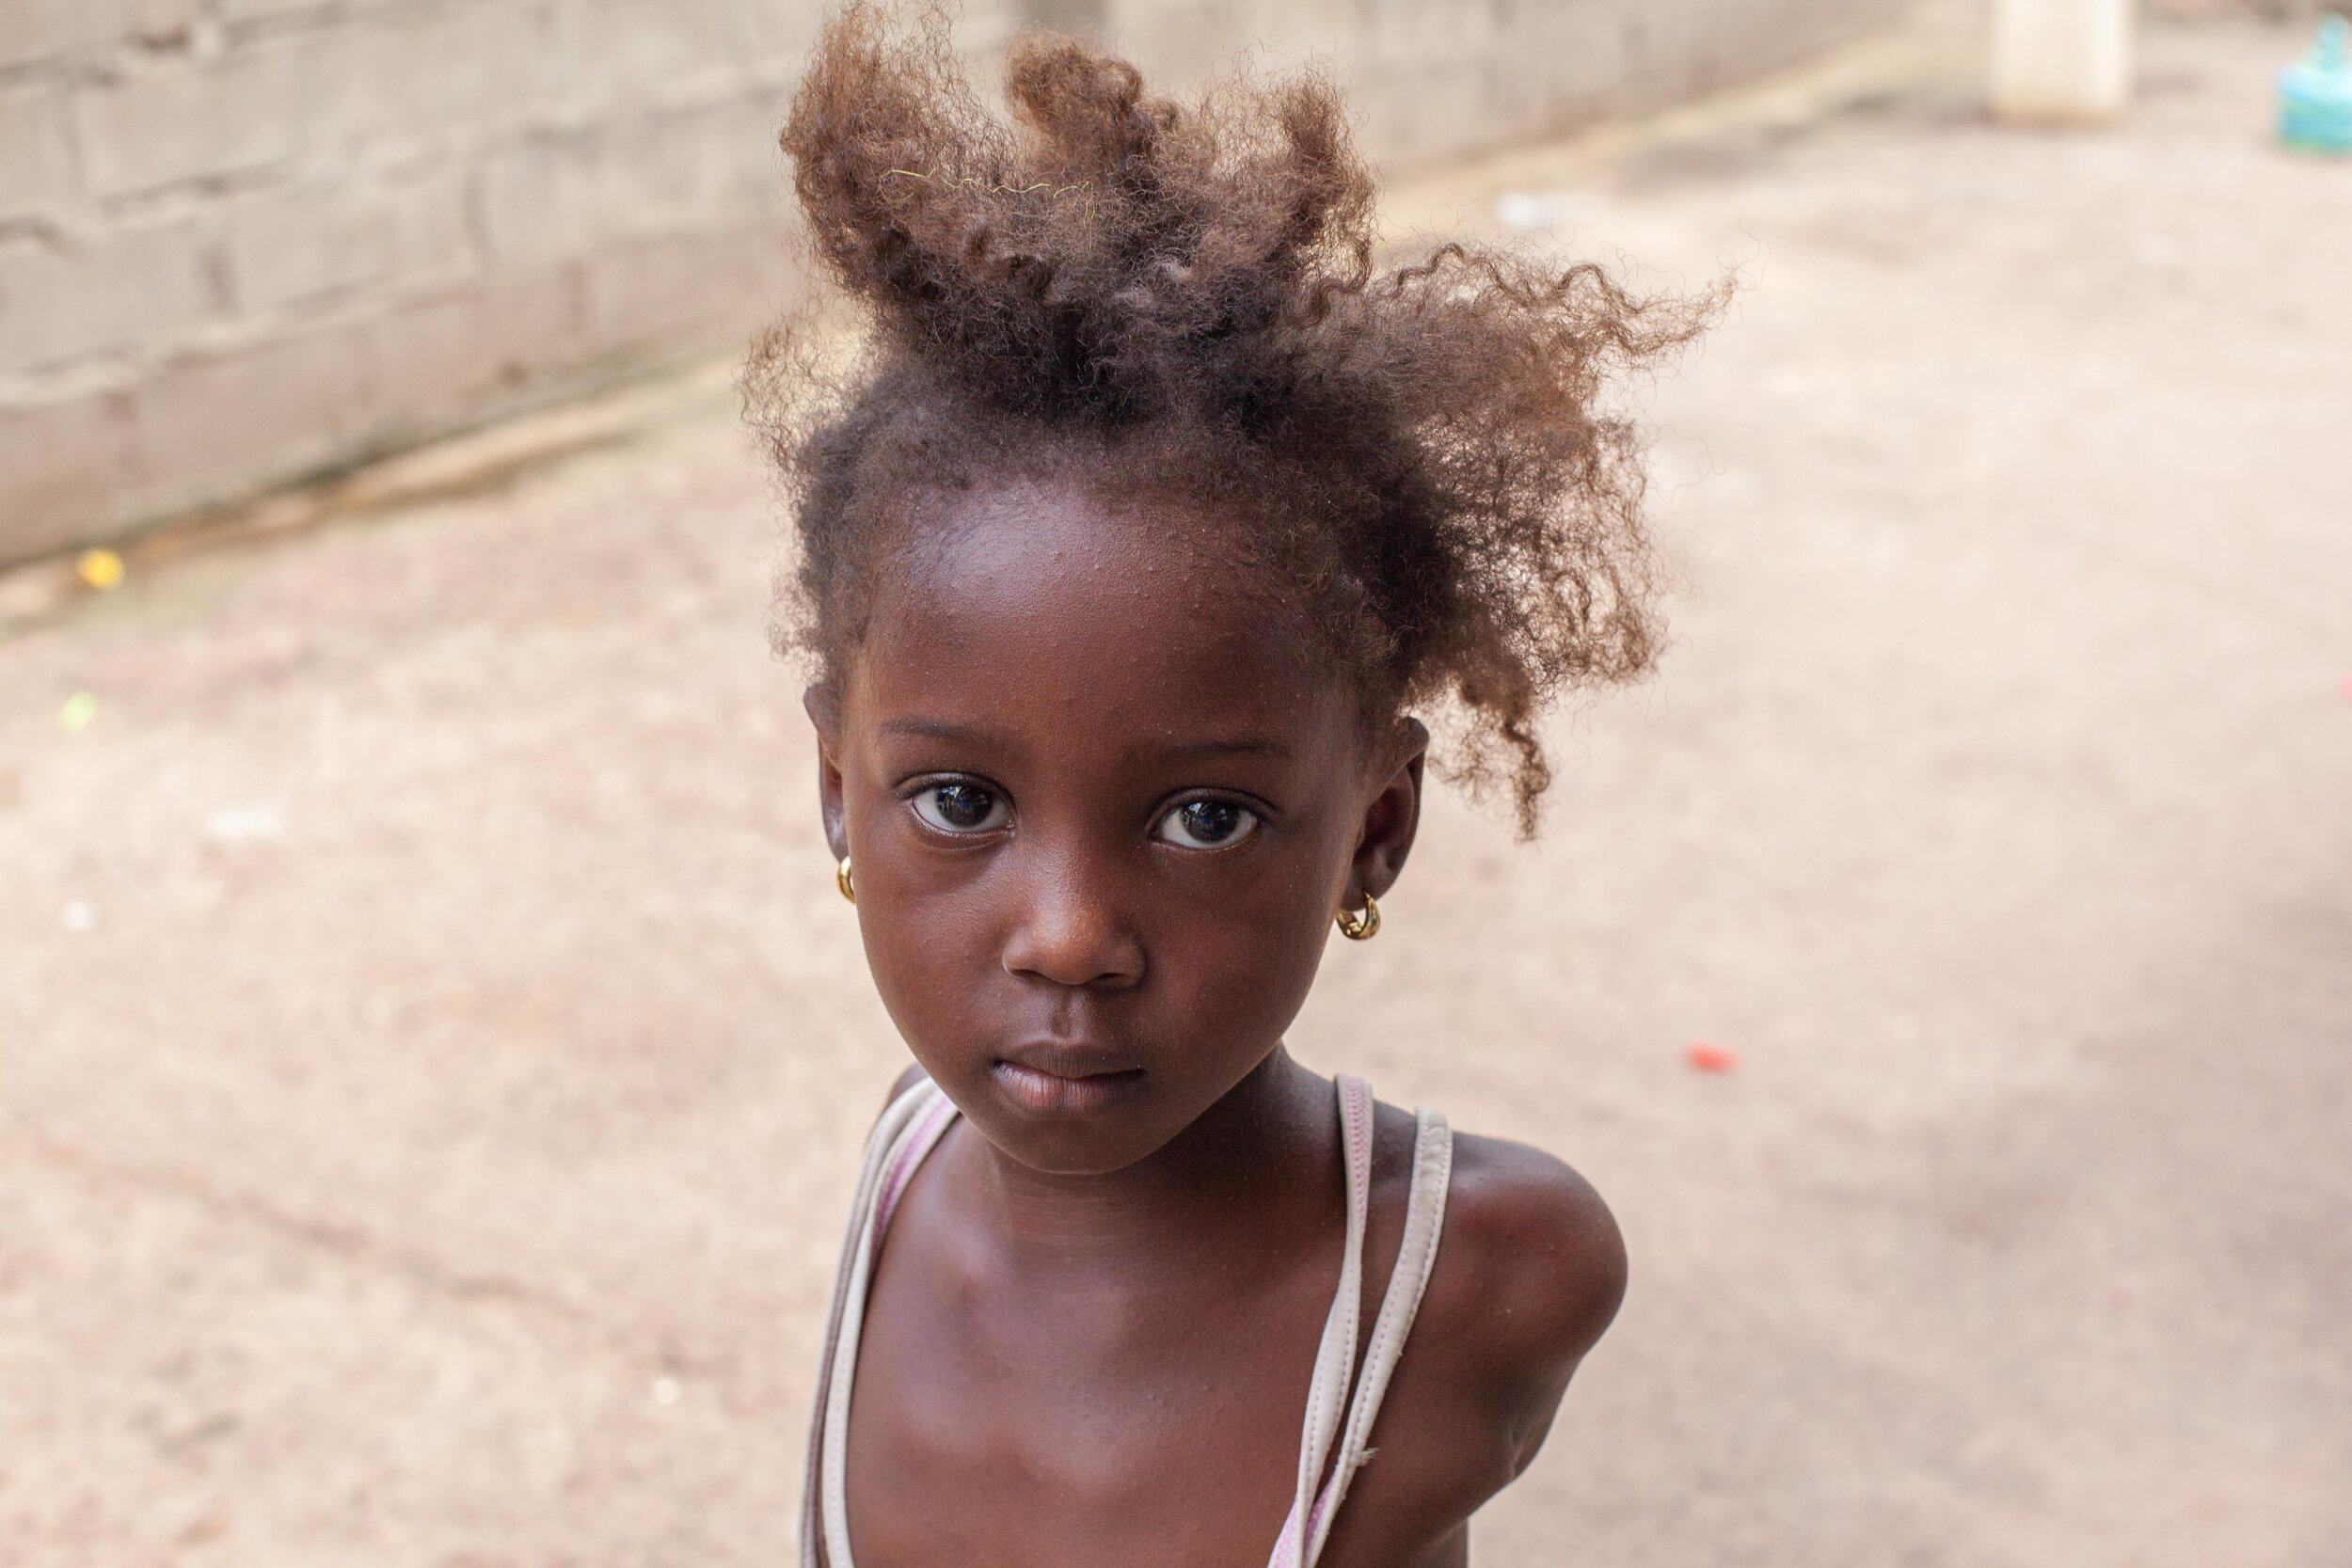 Street portrait of a young girl in The Gambia.